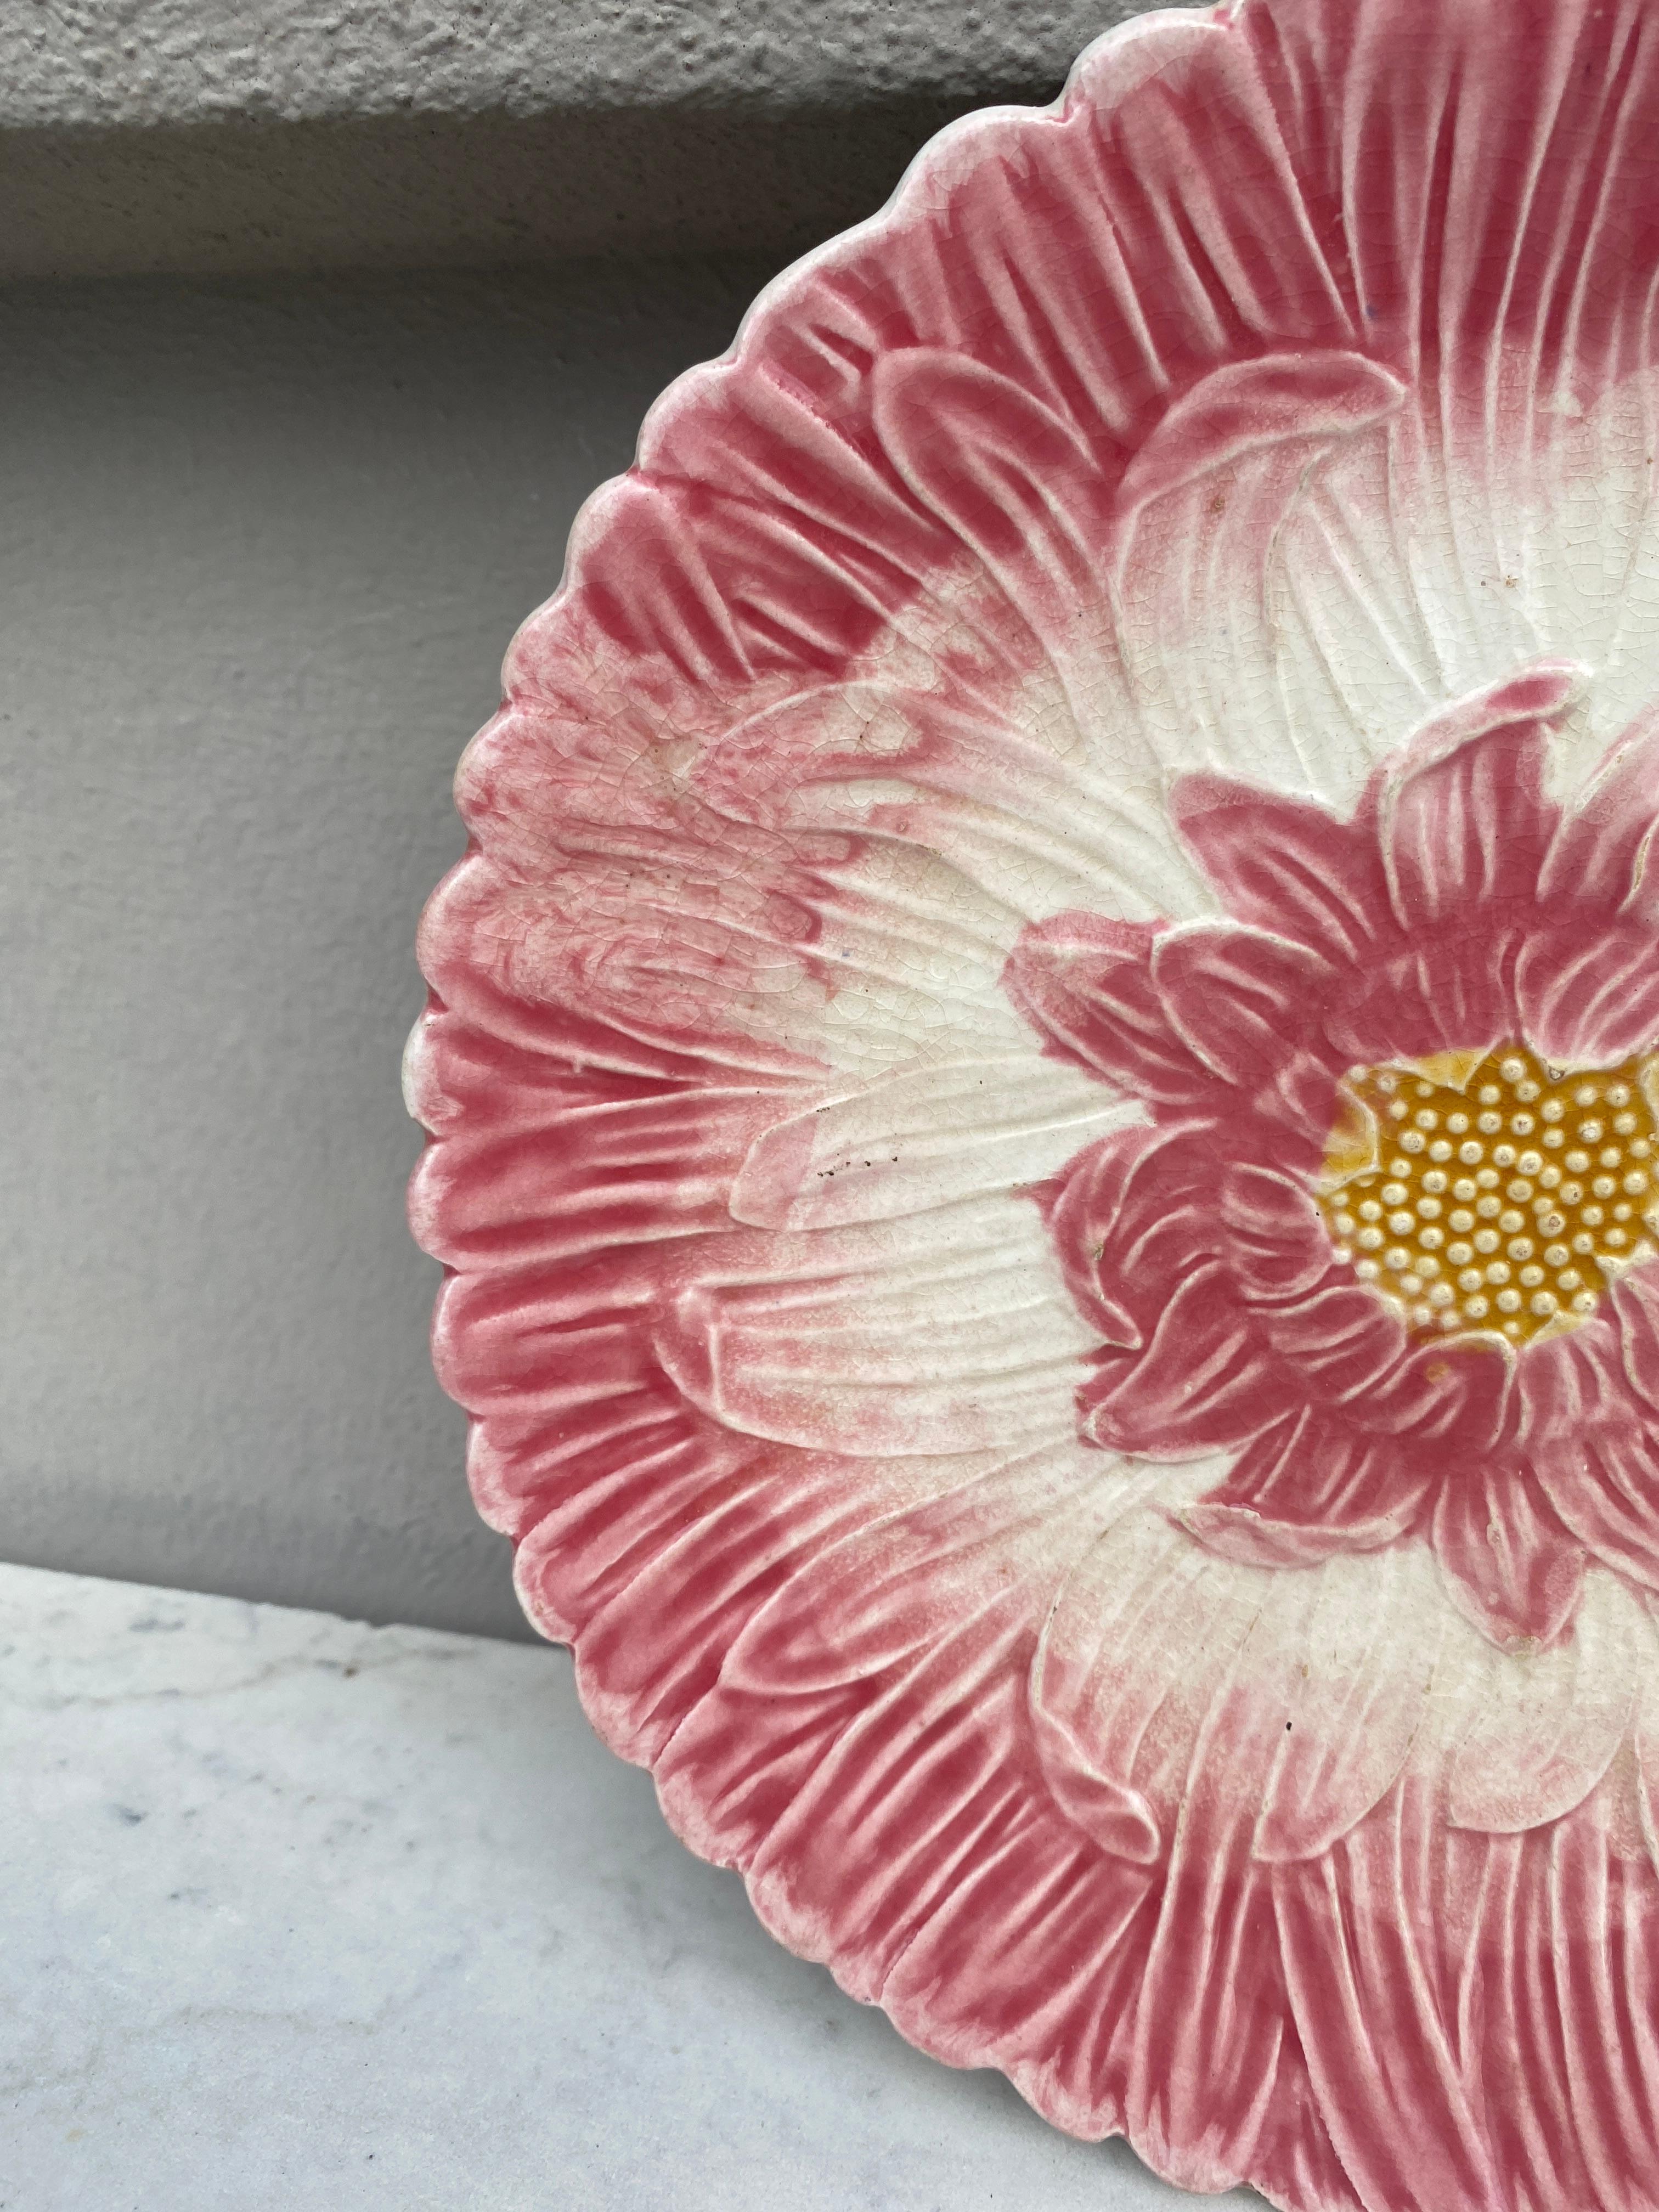 French Majolica pink daisy plate Orchies, circa 1890.